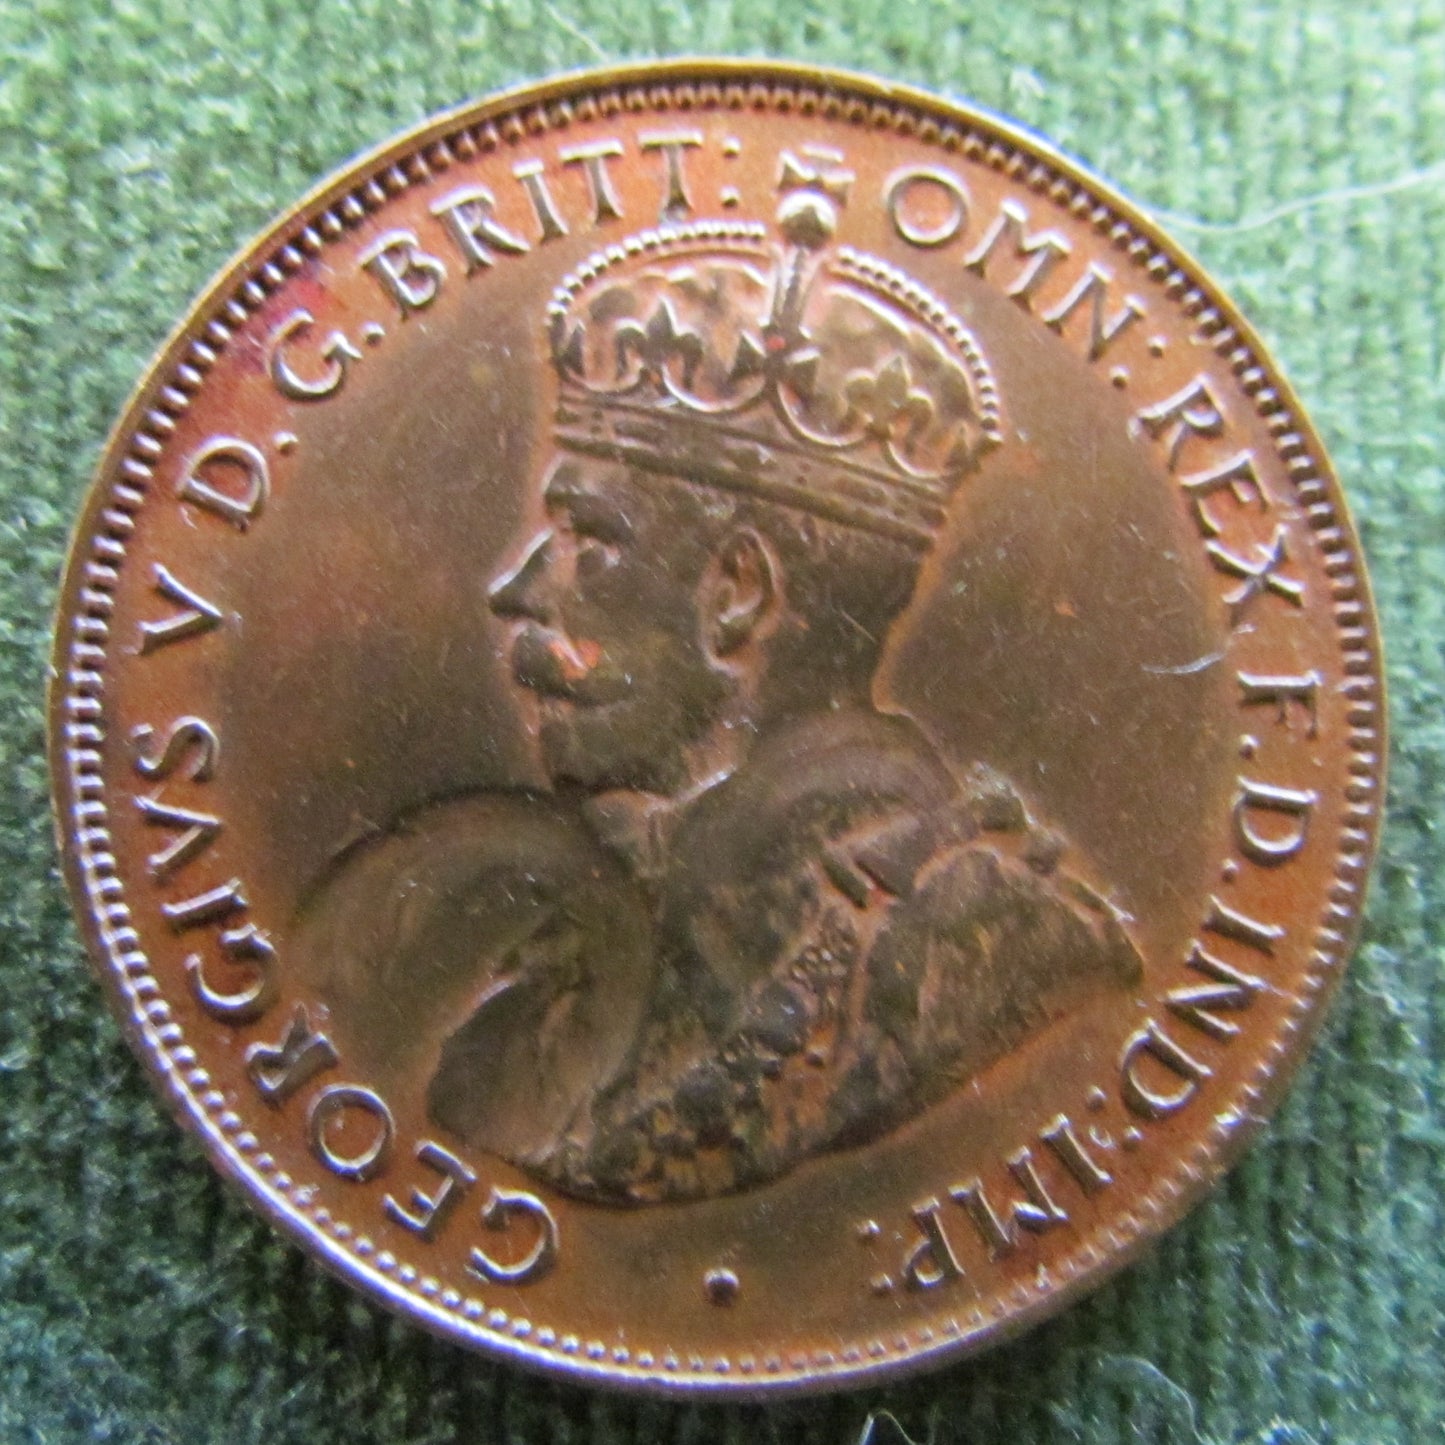 Australian 1933 1/2d Half Penny King George V Coin - Variety Low Circulation Error Coin